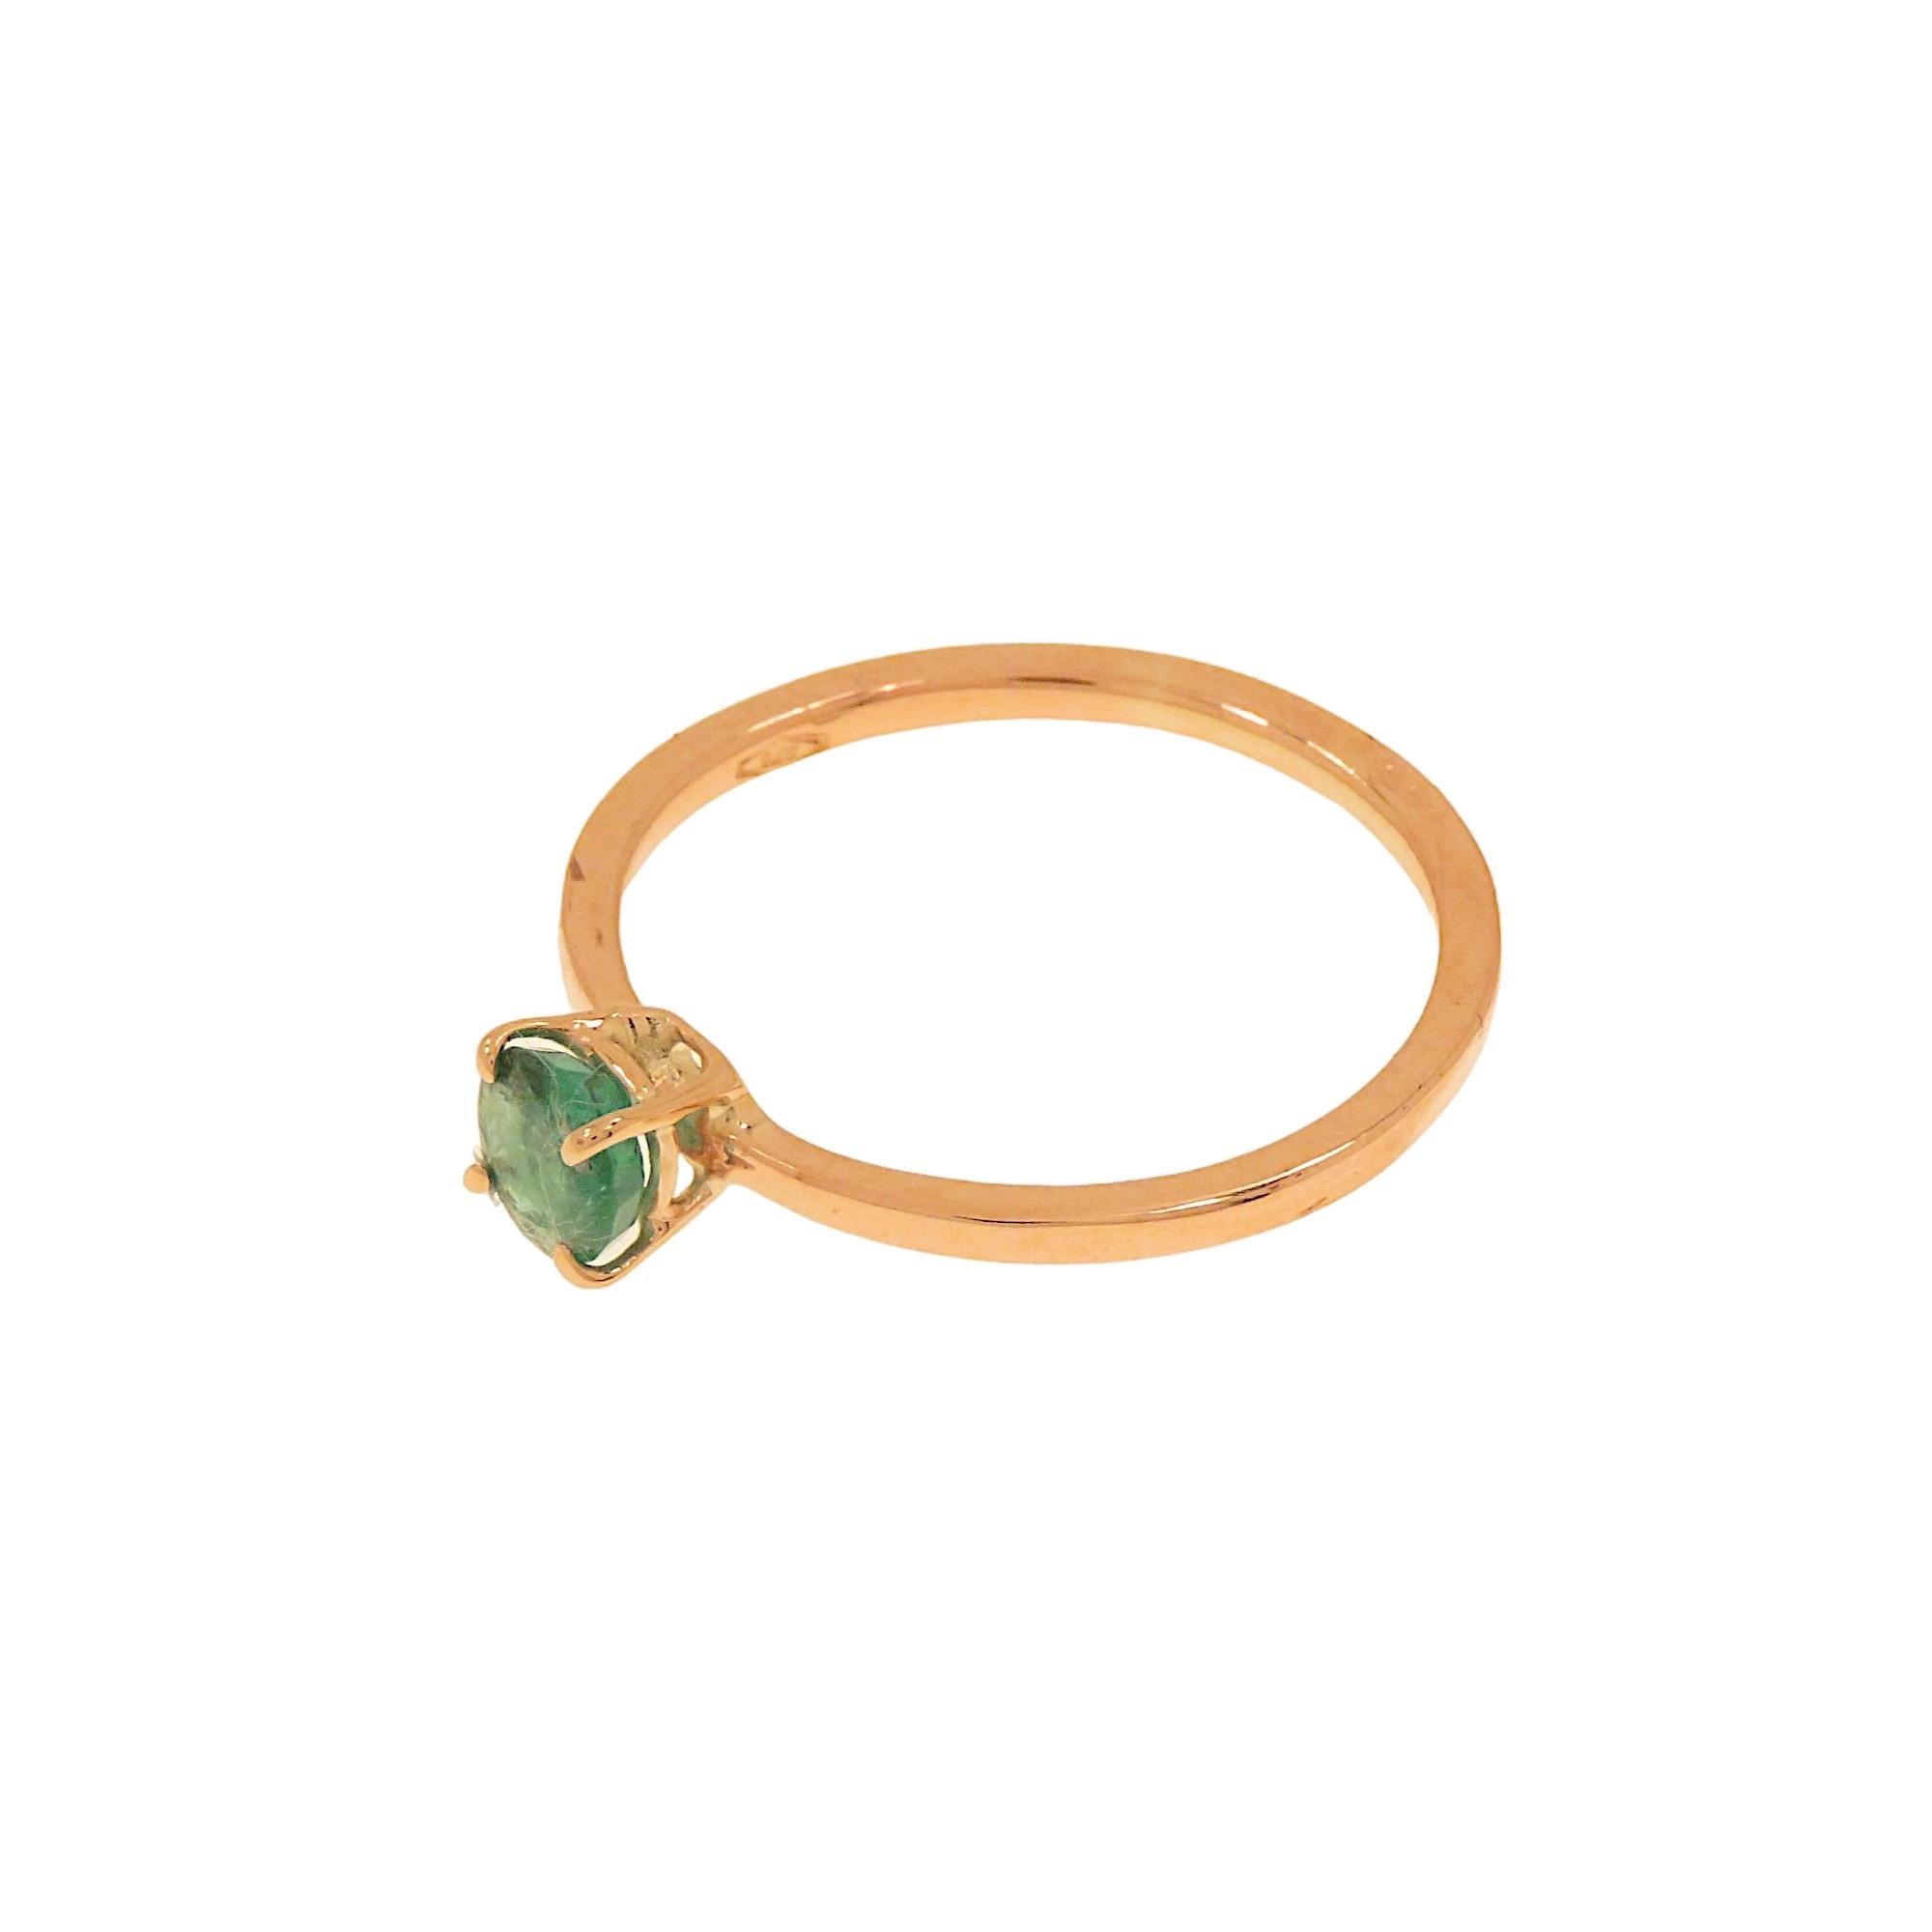 Women's Botta jewelry rose gold emerald ring made in Italy For Sale